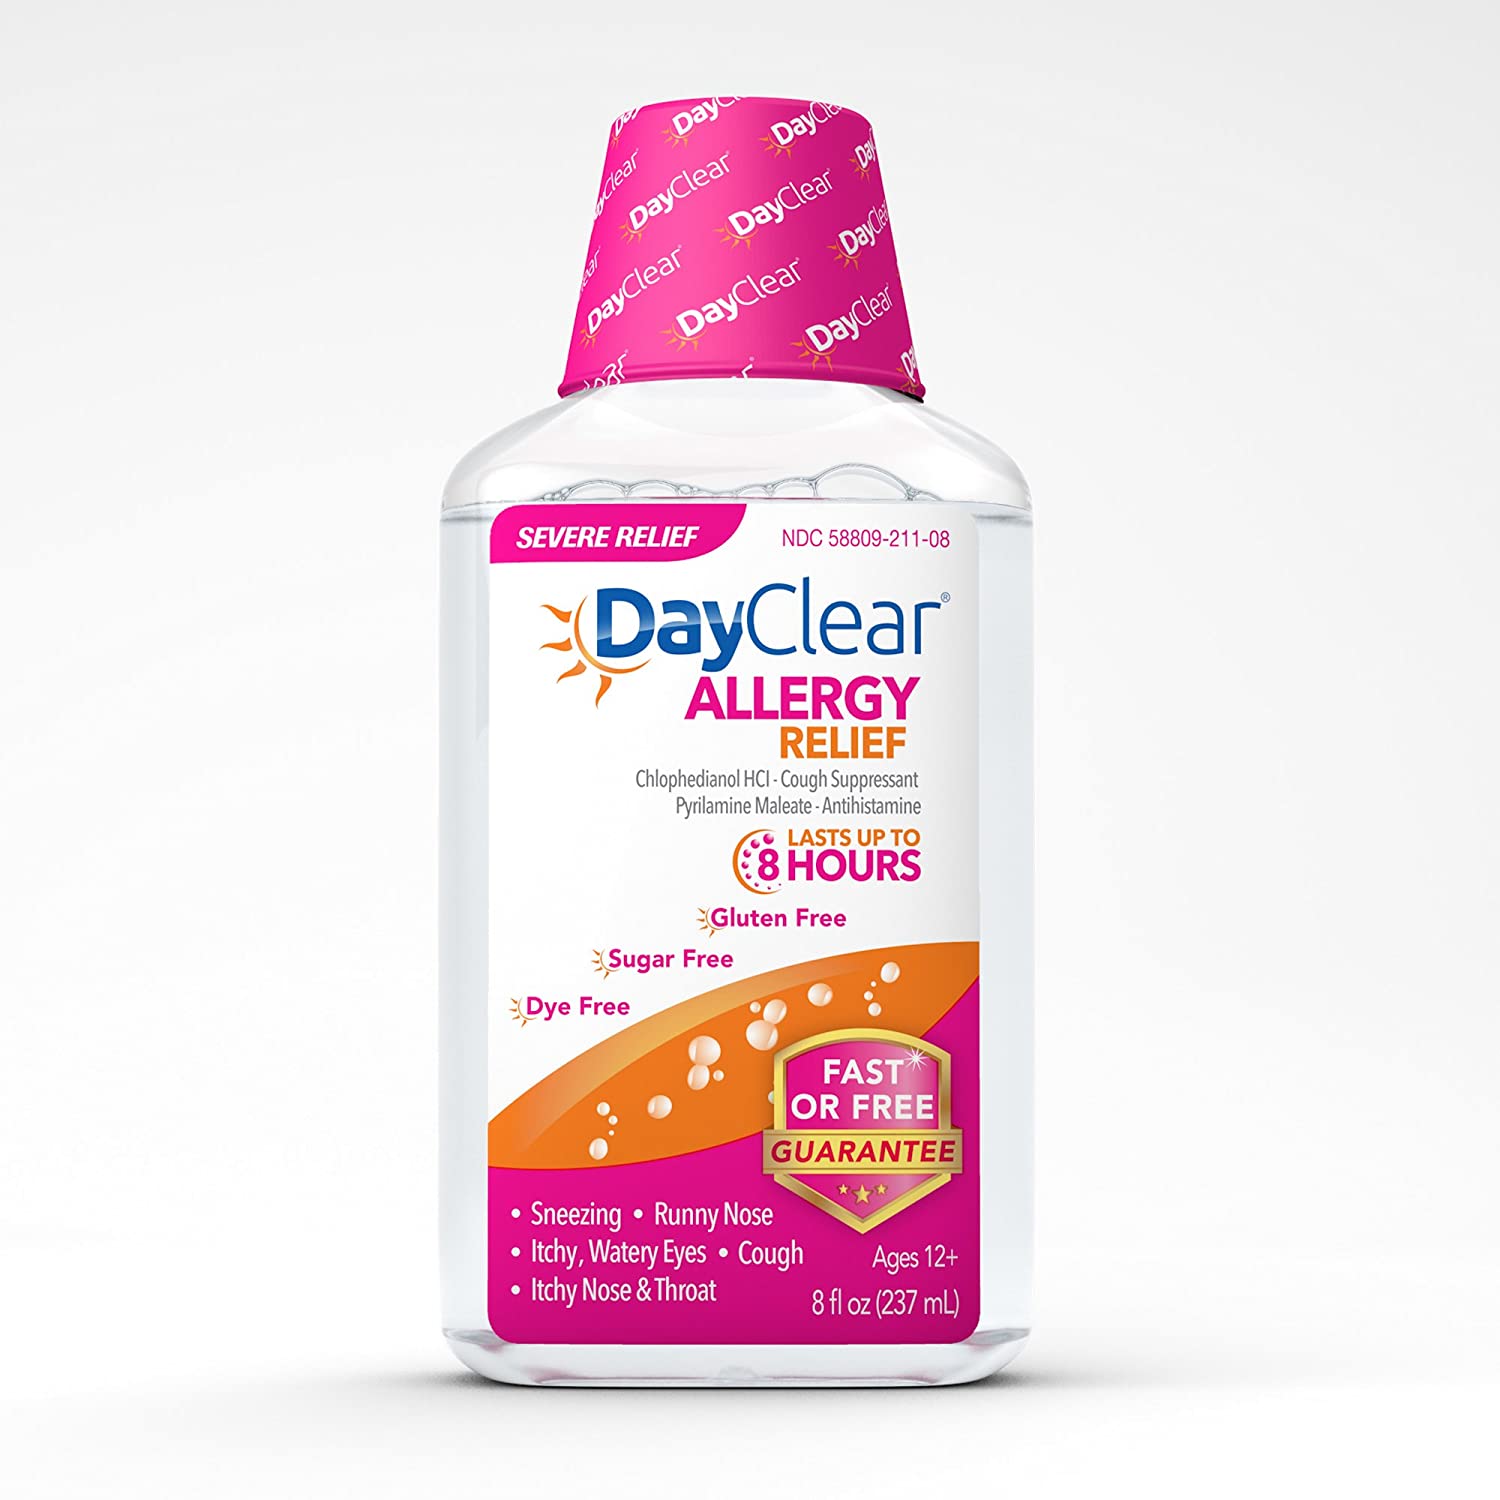 Allergy Medicine To Help With Cough